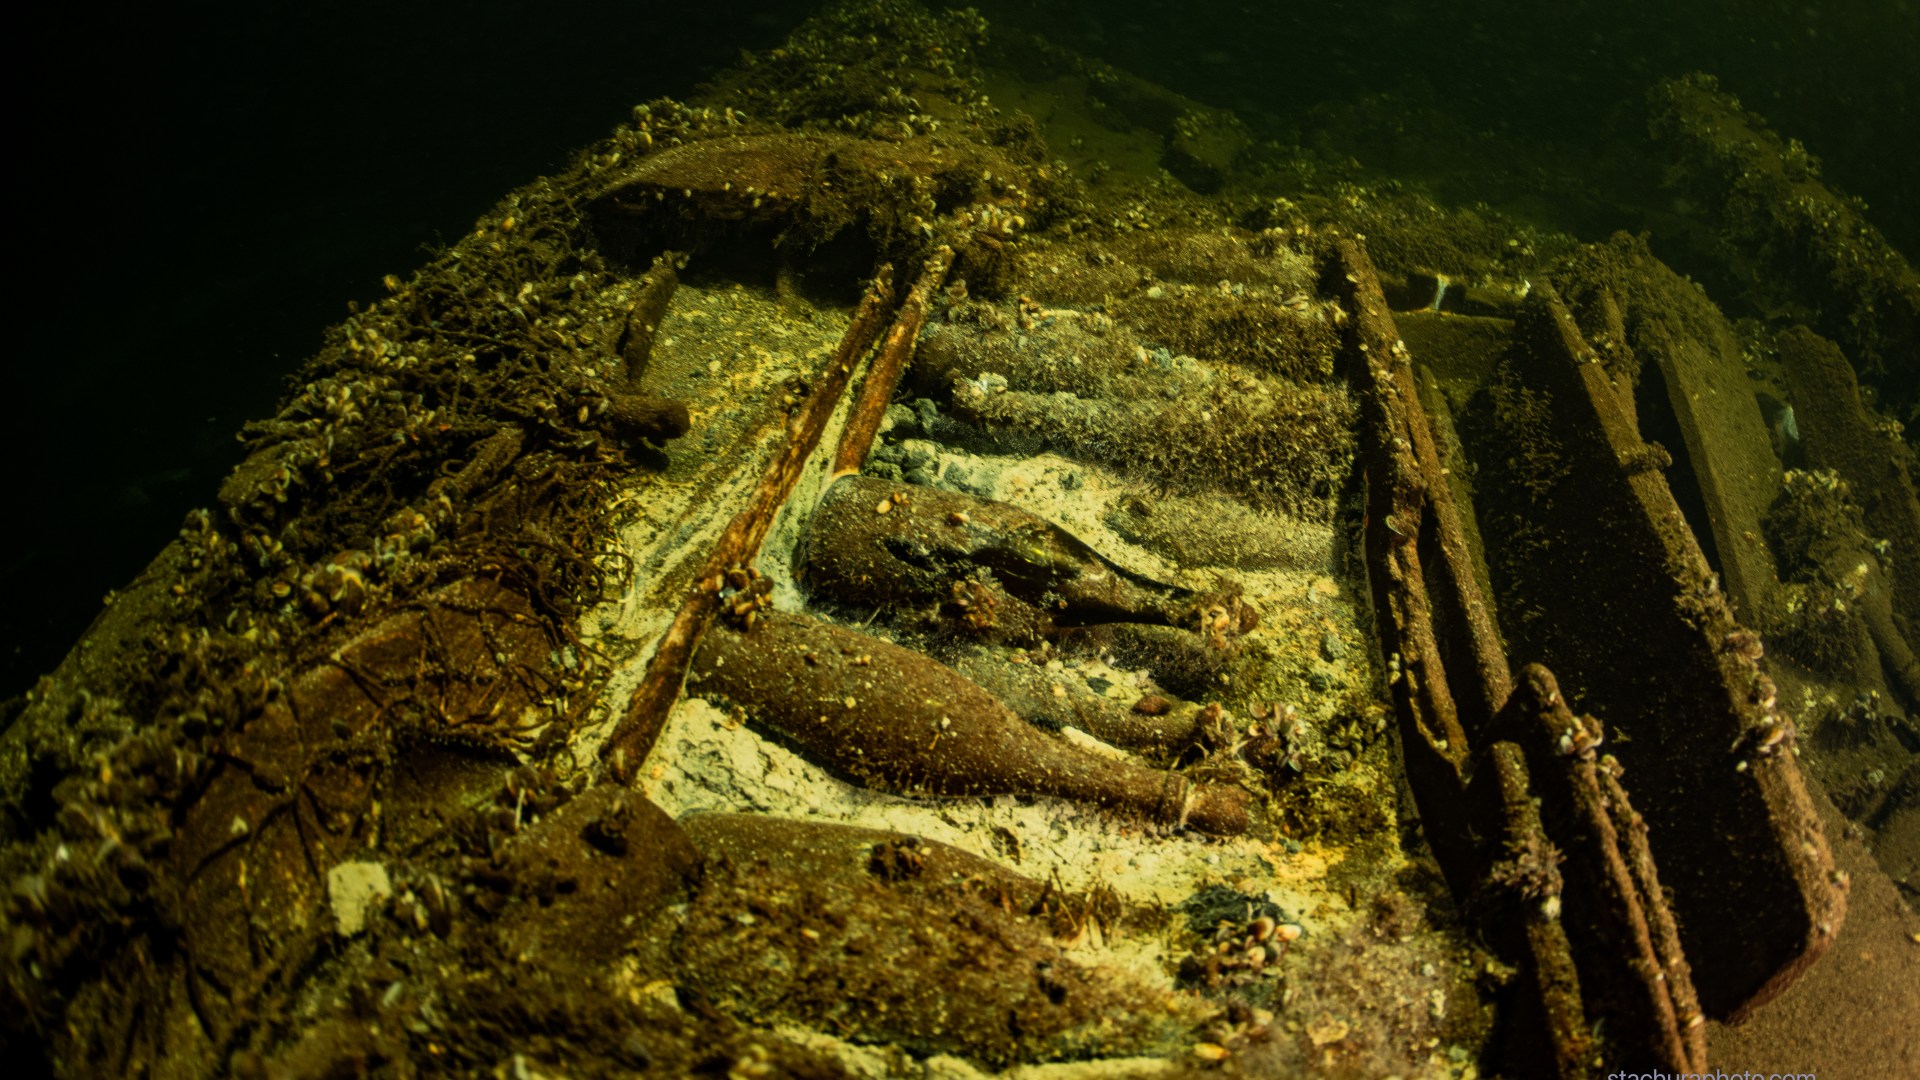 Divers discover eerie shipwreck with hundreds of champagne bottles onboard after mysteriously vanishing 171 years ago [Video]